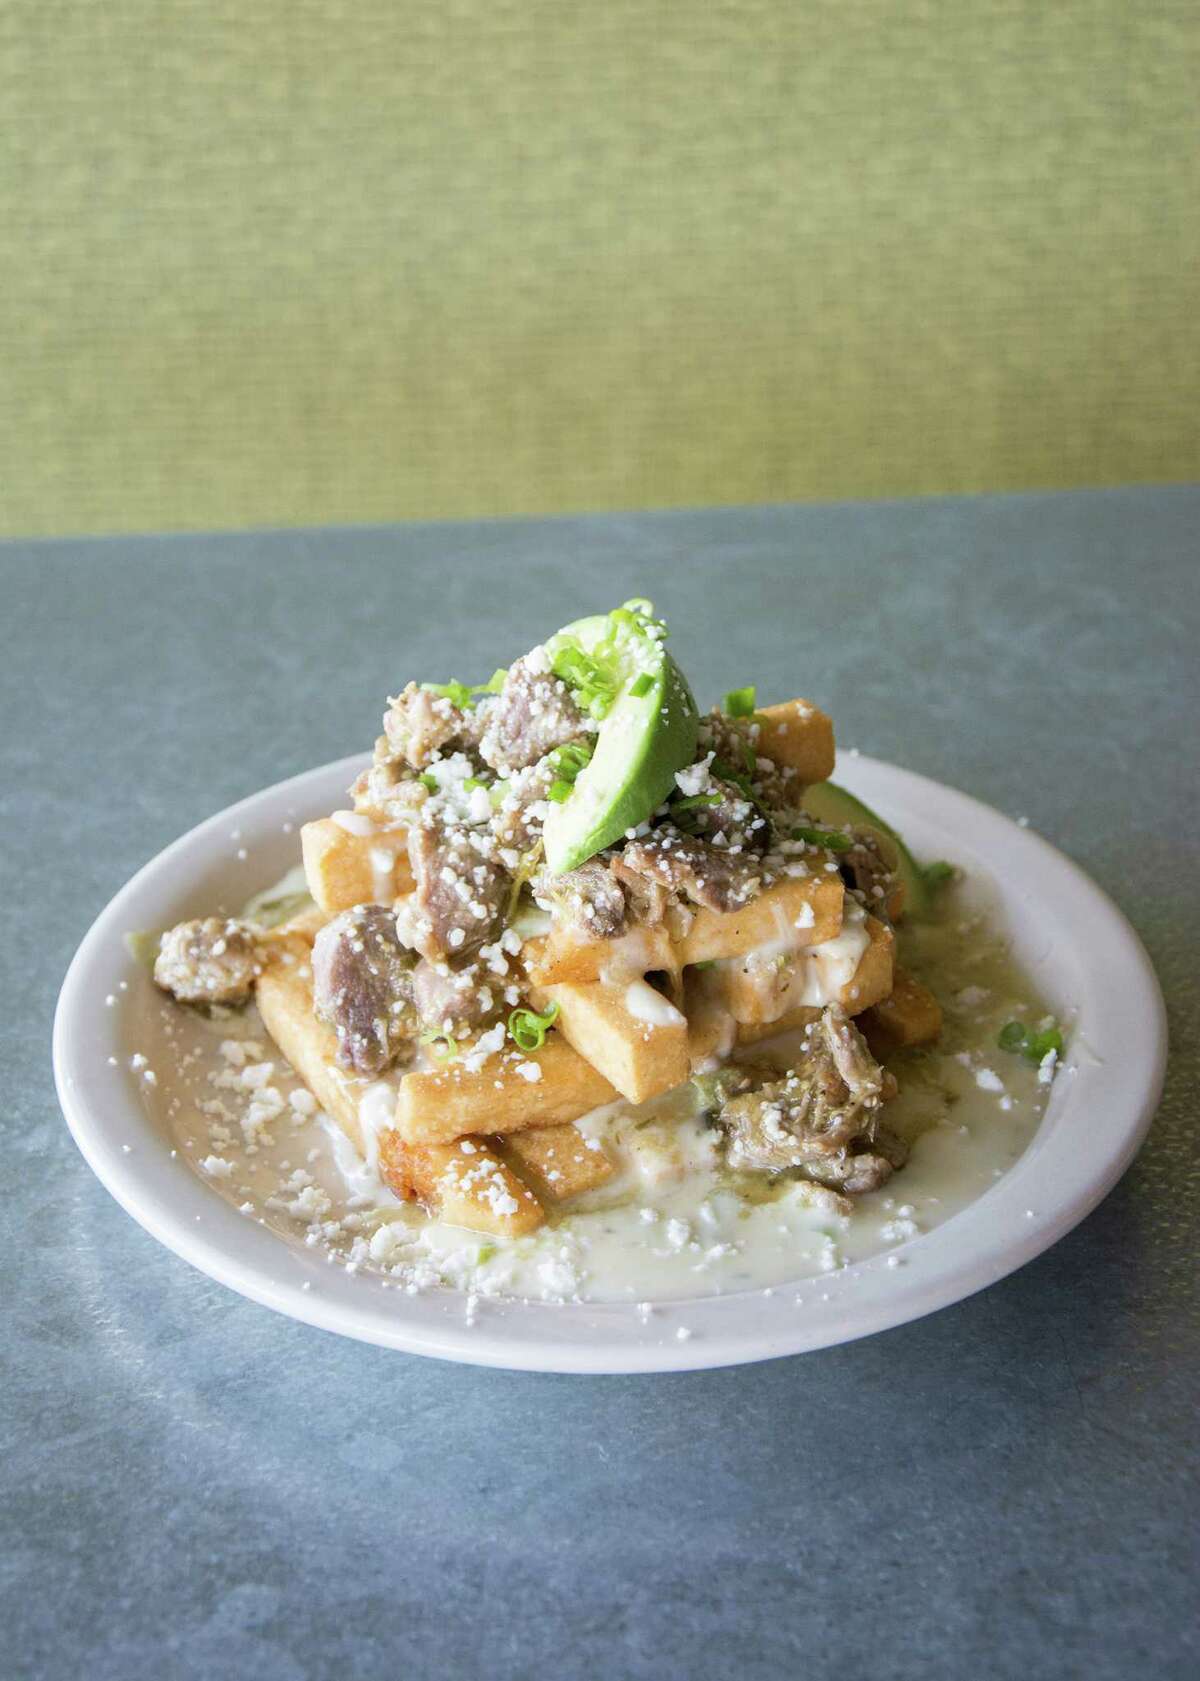 The masa fries at Flair include green chile pork and queso blanco.